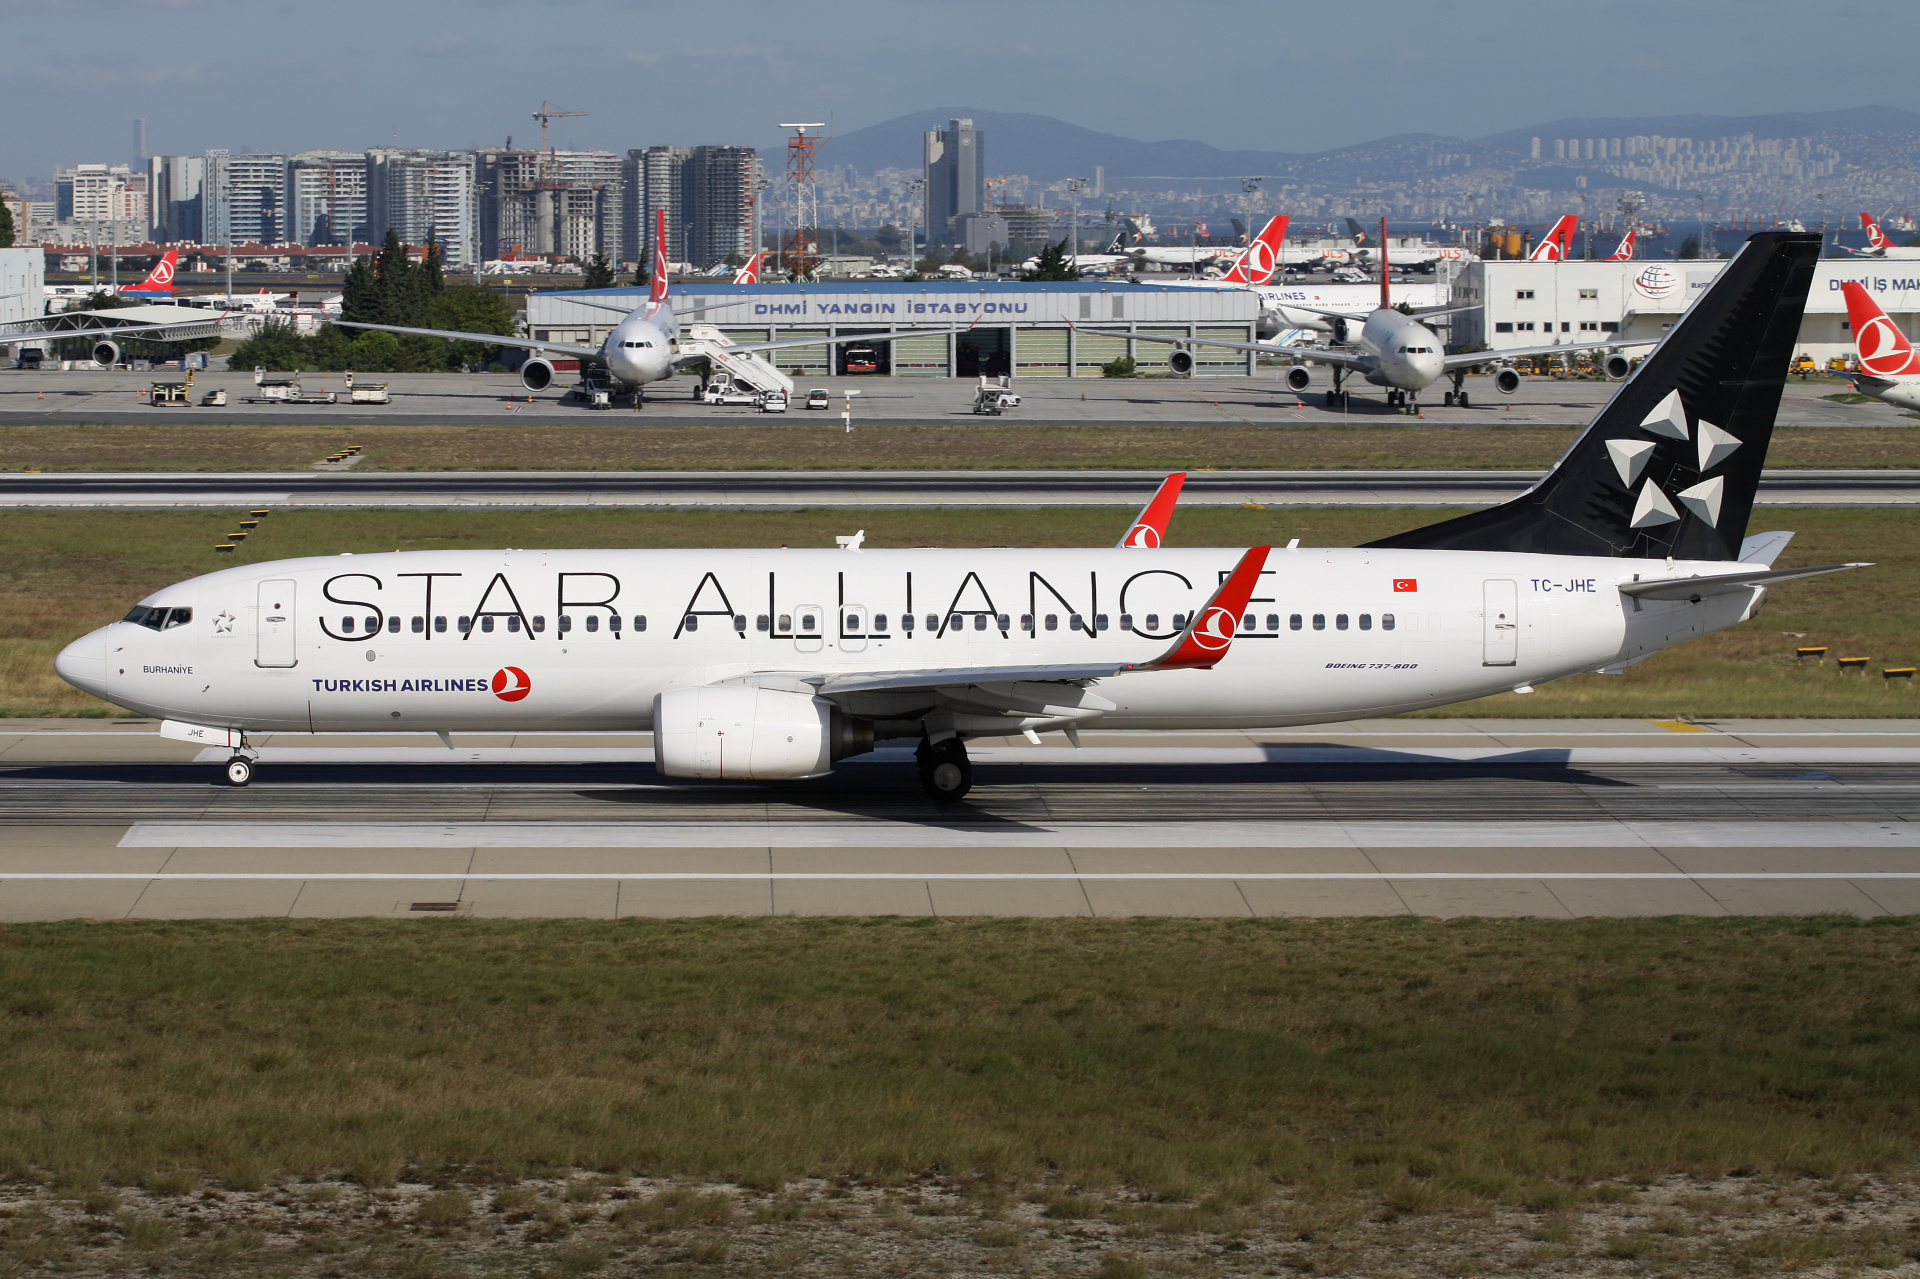 TC-JHE (Star Alliance livery) (Aircraft » Istanbul Atatürk Airport » Boeing 737-800 » THY Turkish Airlines)